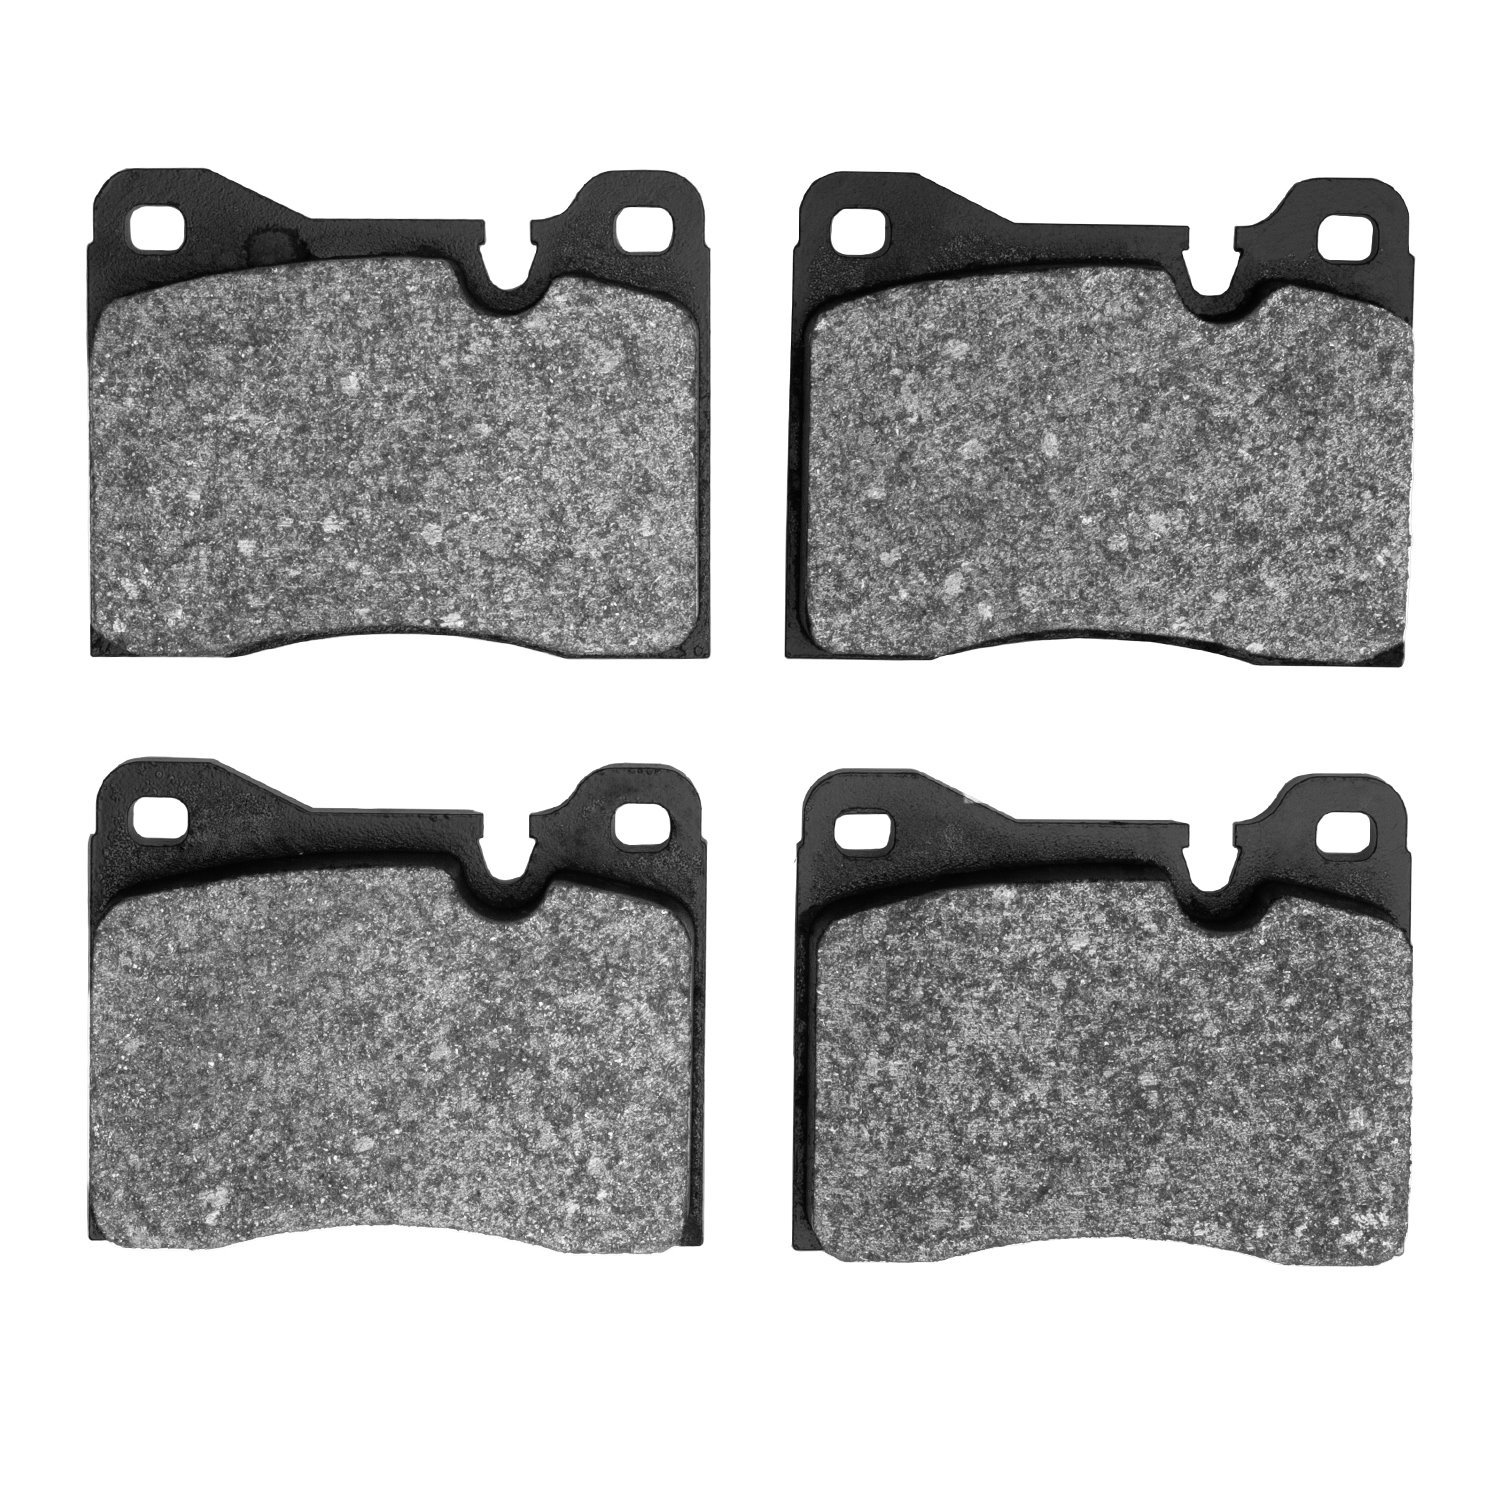 1551-0163-00 5000 Advanced Low-Metallic Brake Pads, 1976-1988 Multiple Makes/Models, Position: Front